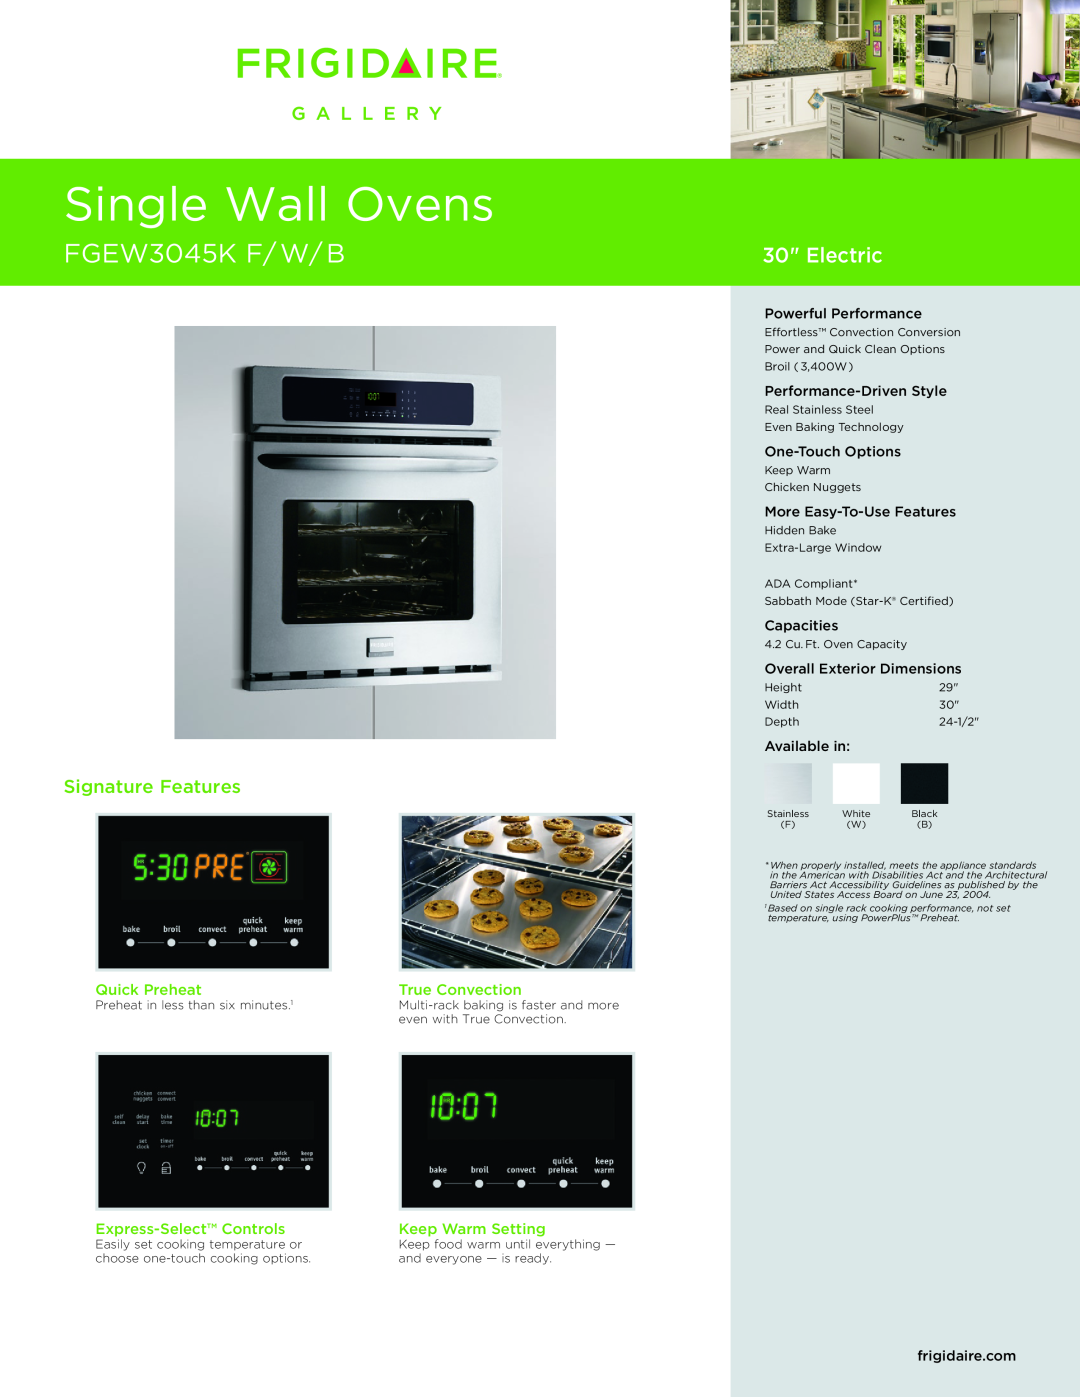 Frigidaire FGEW3045KW dimensions Powerful Performance, Performance-DrivenStyle, One-TouchOptions, More Easy-To-UseFeatures 